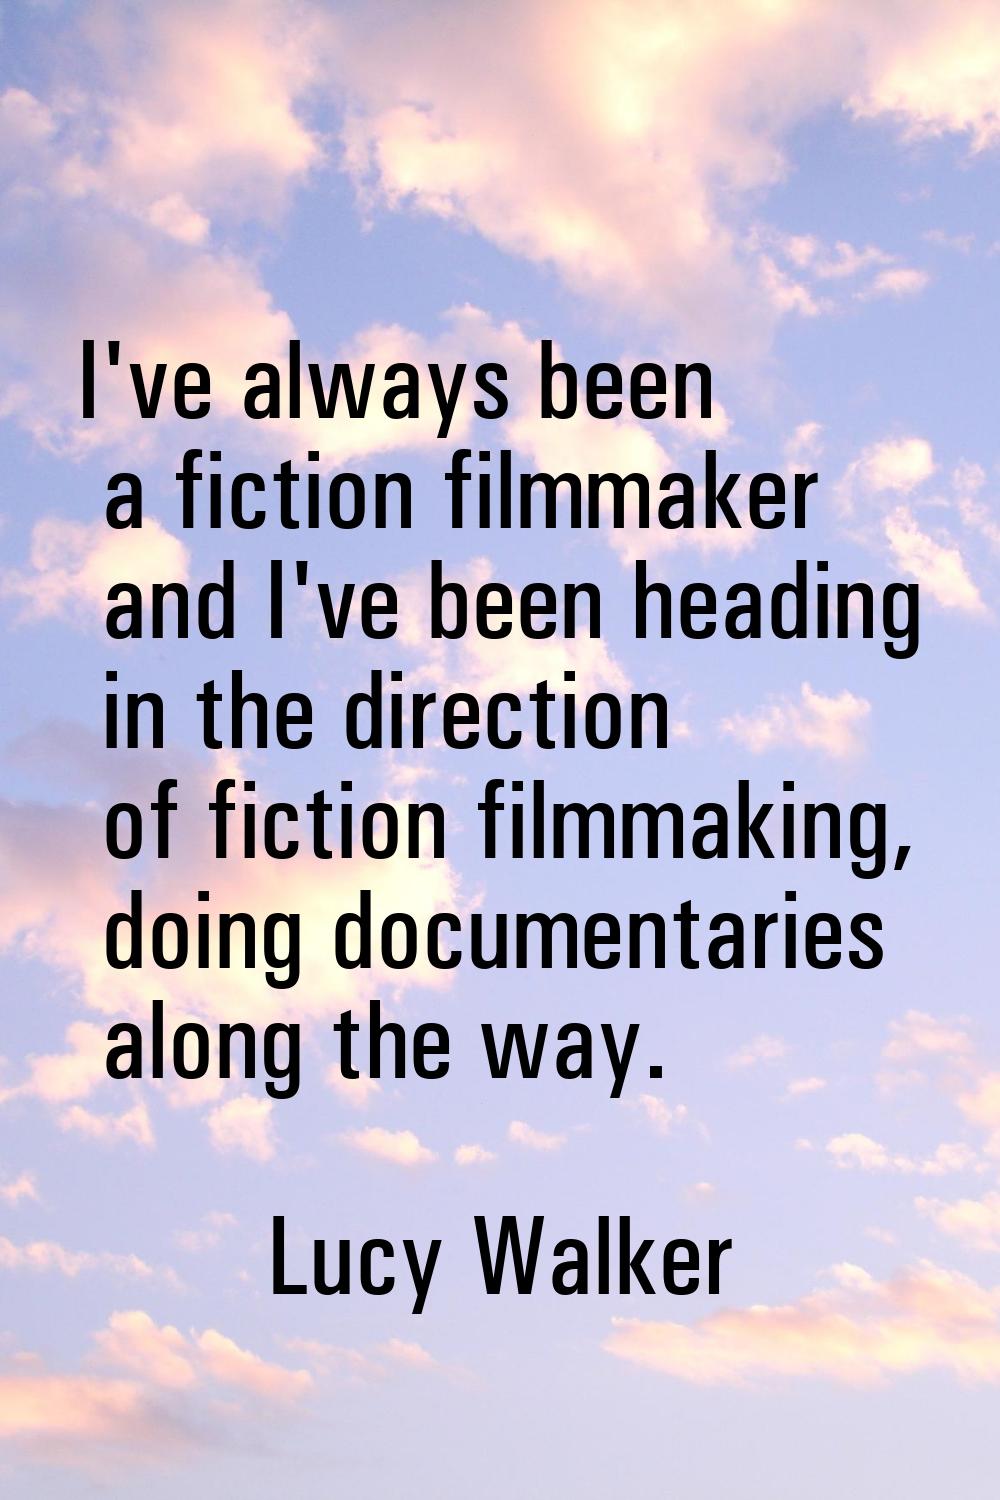 I've always been a fiction filmmaker and I've been heading in the direction of fiction filmmaking, 